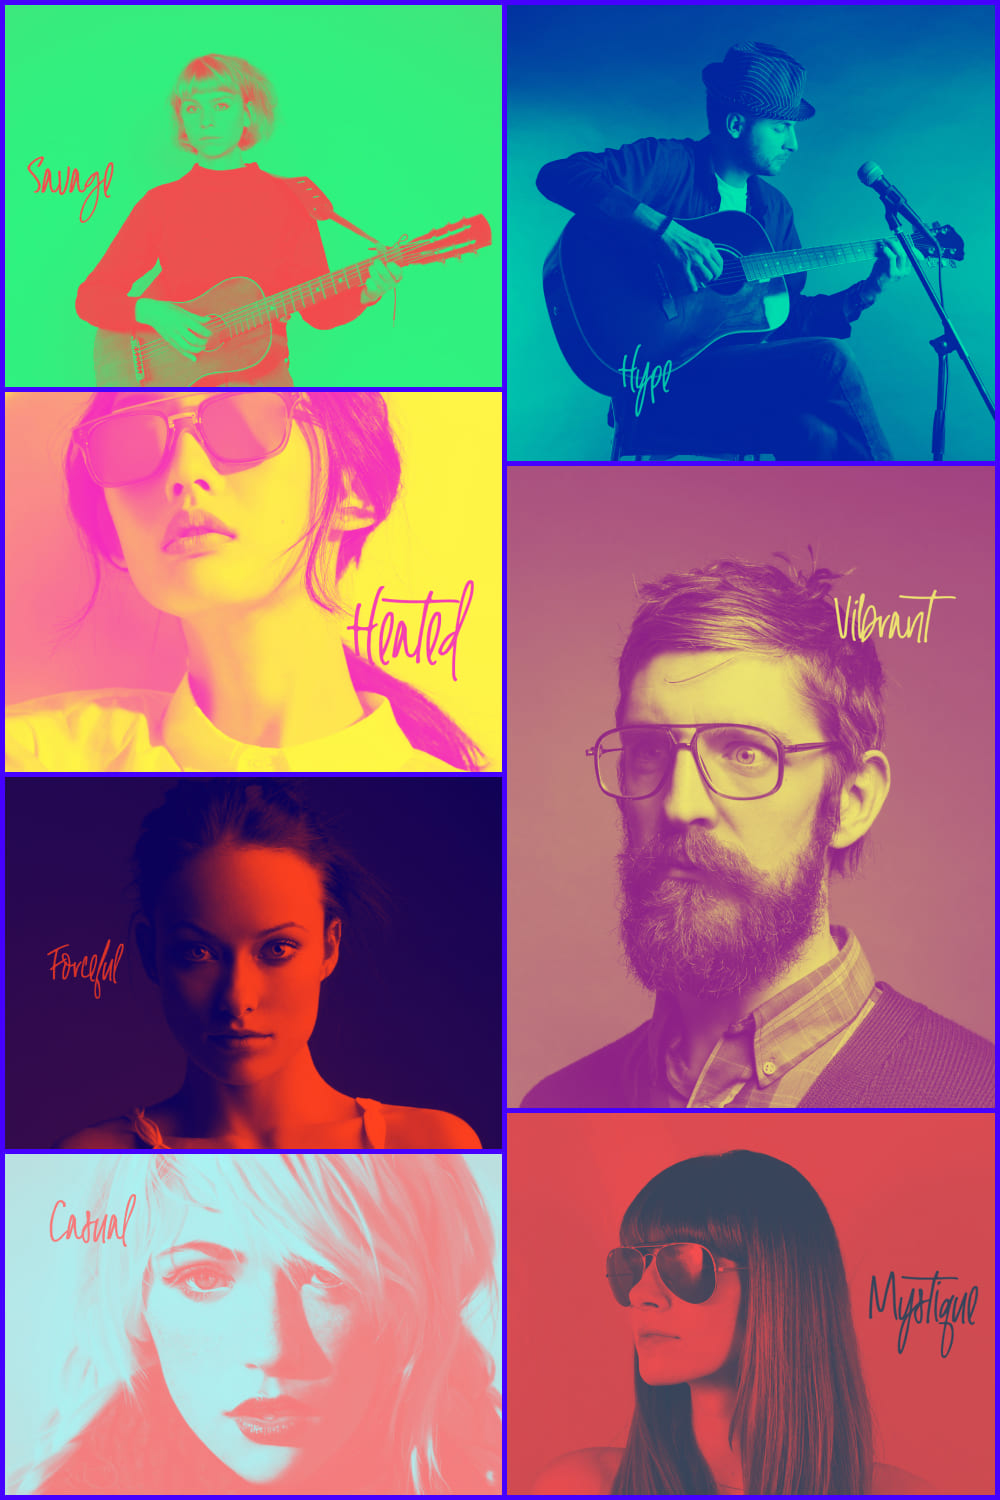 Collage of photos of men and women in different bright colors.